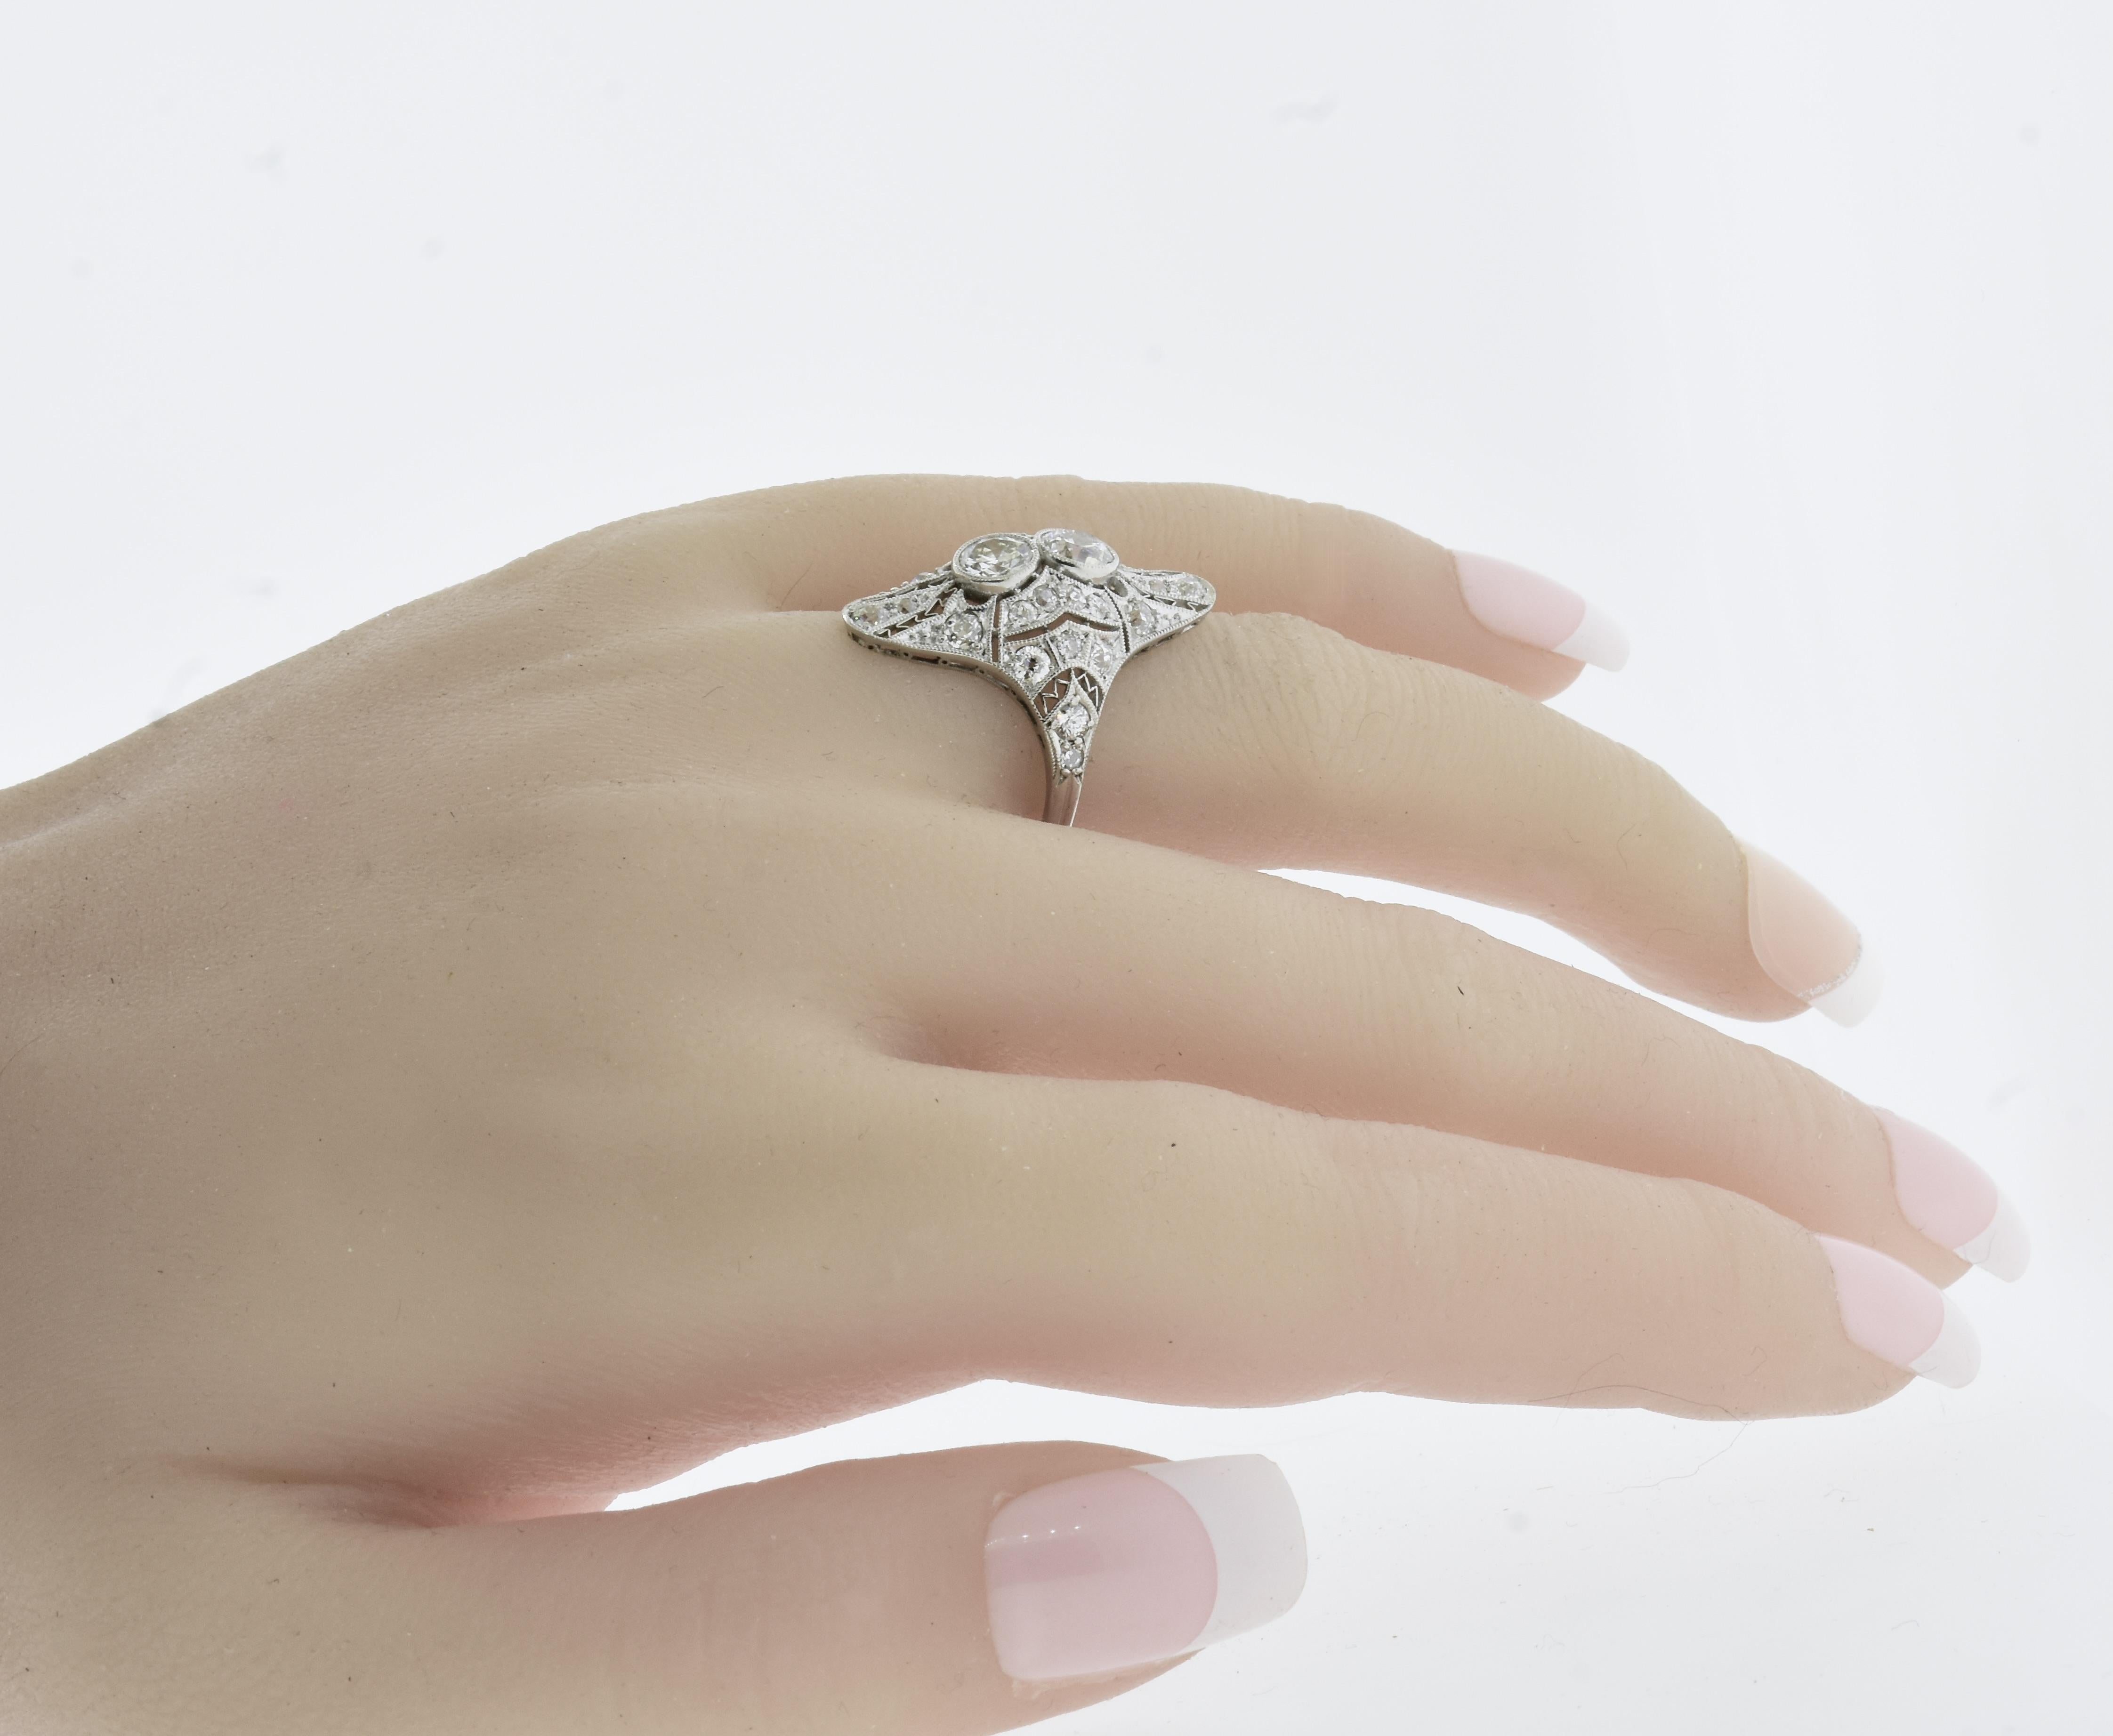 Edwardian Antique Platinum and Diamond Ring, circa 1915 In Excellent Condition For Sale In Aspen, CO